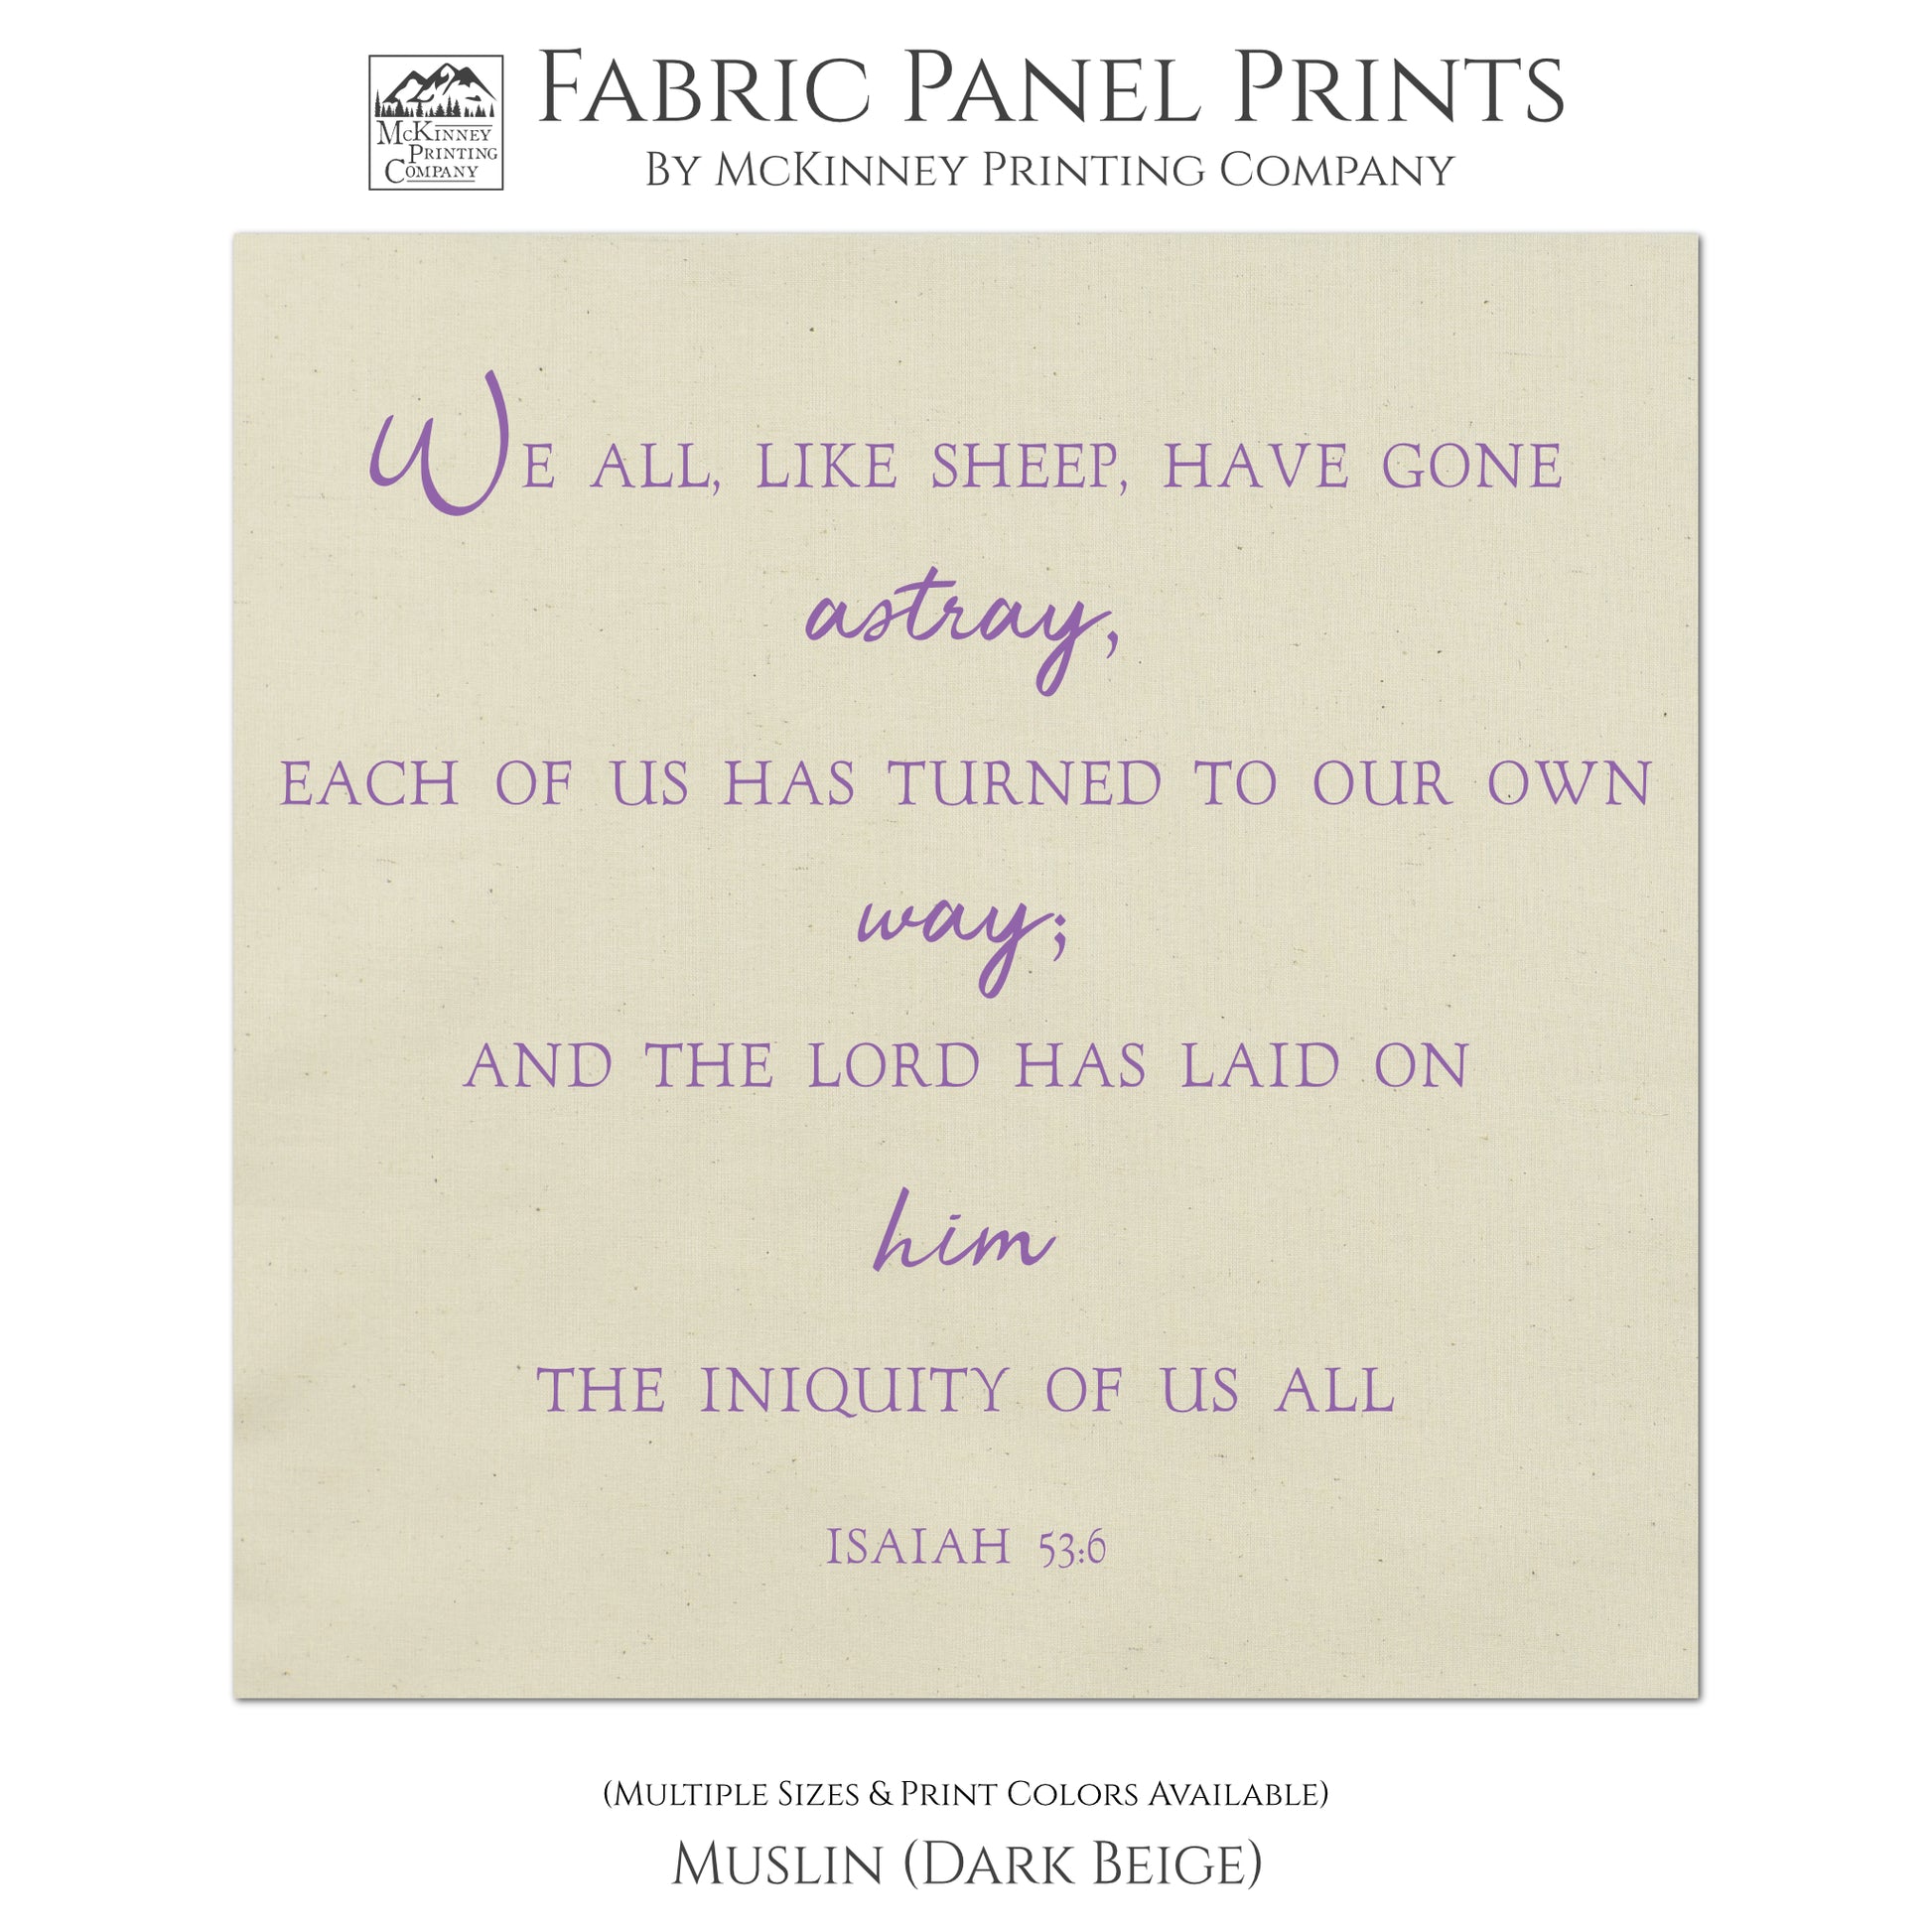 We all, like sheep, have gone astray, each of us has turned to our own way; and the Lord has laid on him the iniquity of us all - Isaiah 53 6. Small Print Quilt Fabric, Wall Art, Quilting Block - Muslin